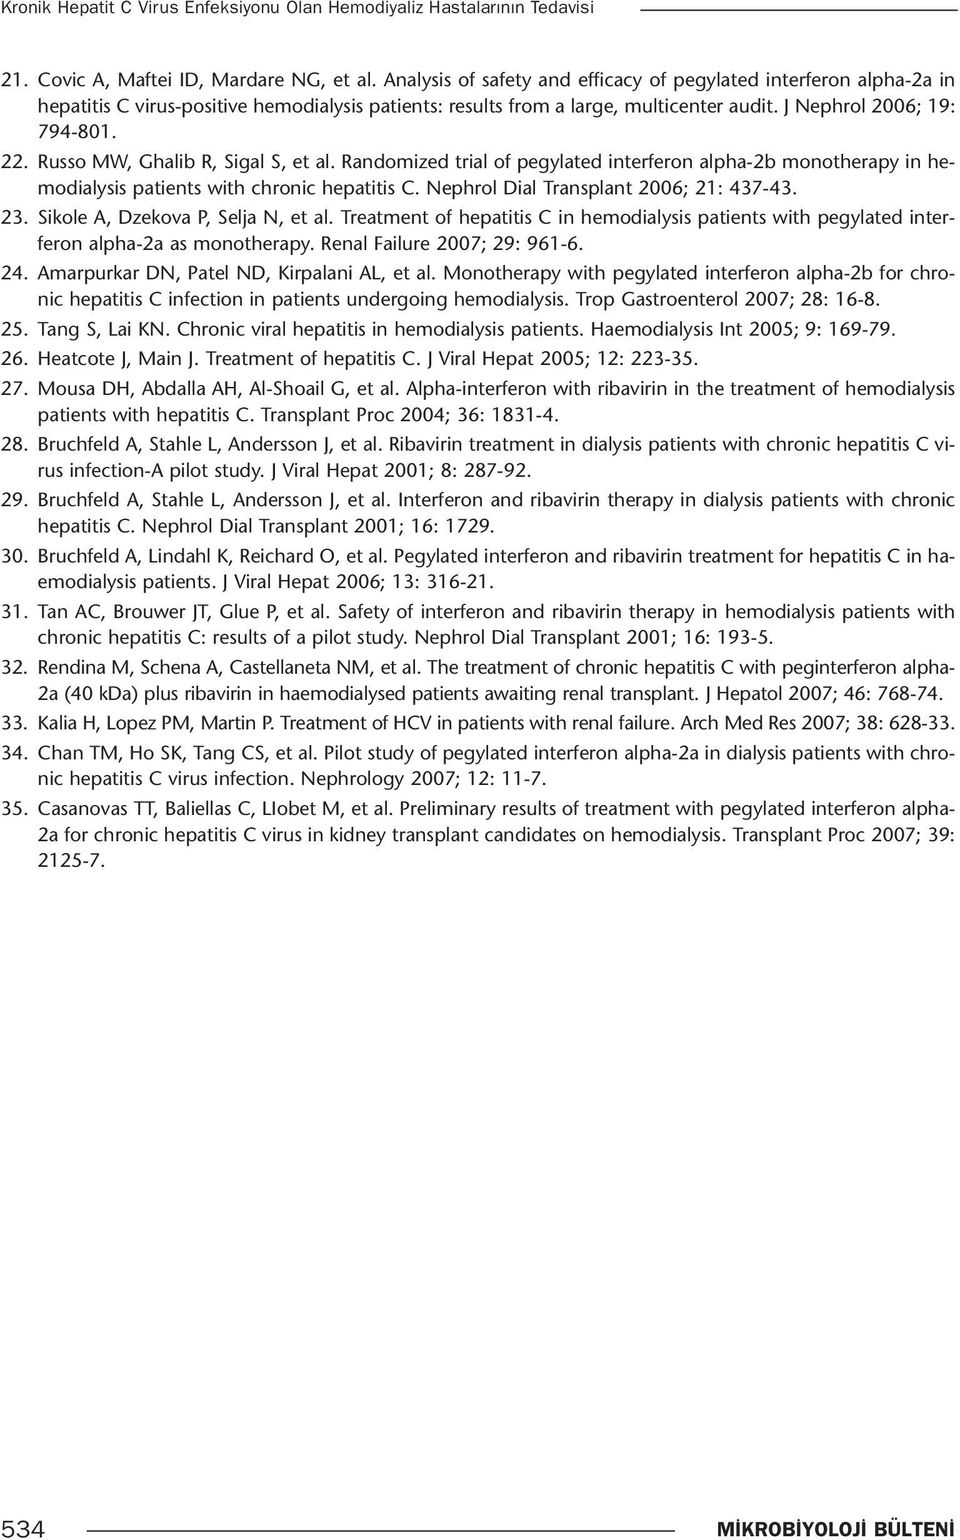 Russo MW, Ghalib R, Sigal S, et al. Randomized trial of pegylated interferon alpha-2b monotherapy in hemodialysis patients with chronic hepatitis C. Nephrol Dial Transplant 2006; 21: 437-43. 23.